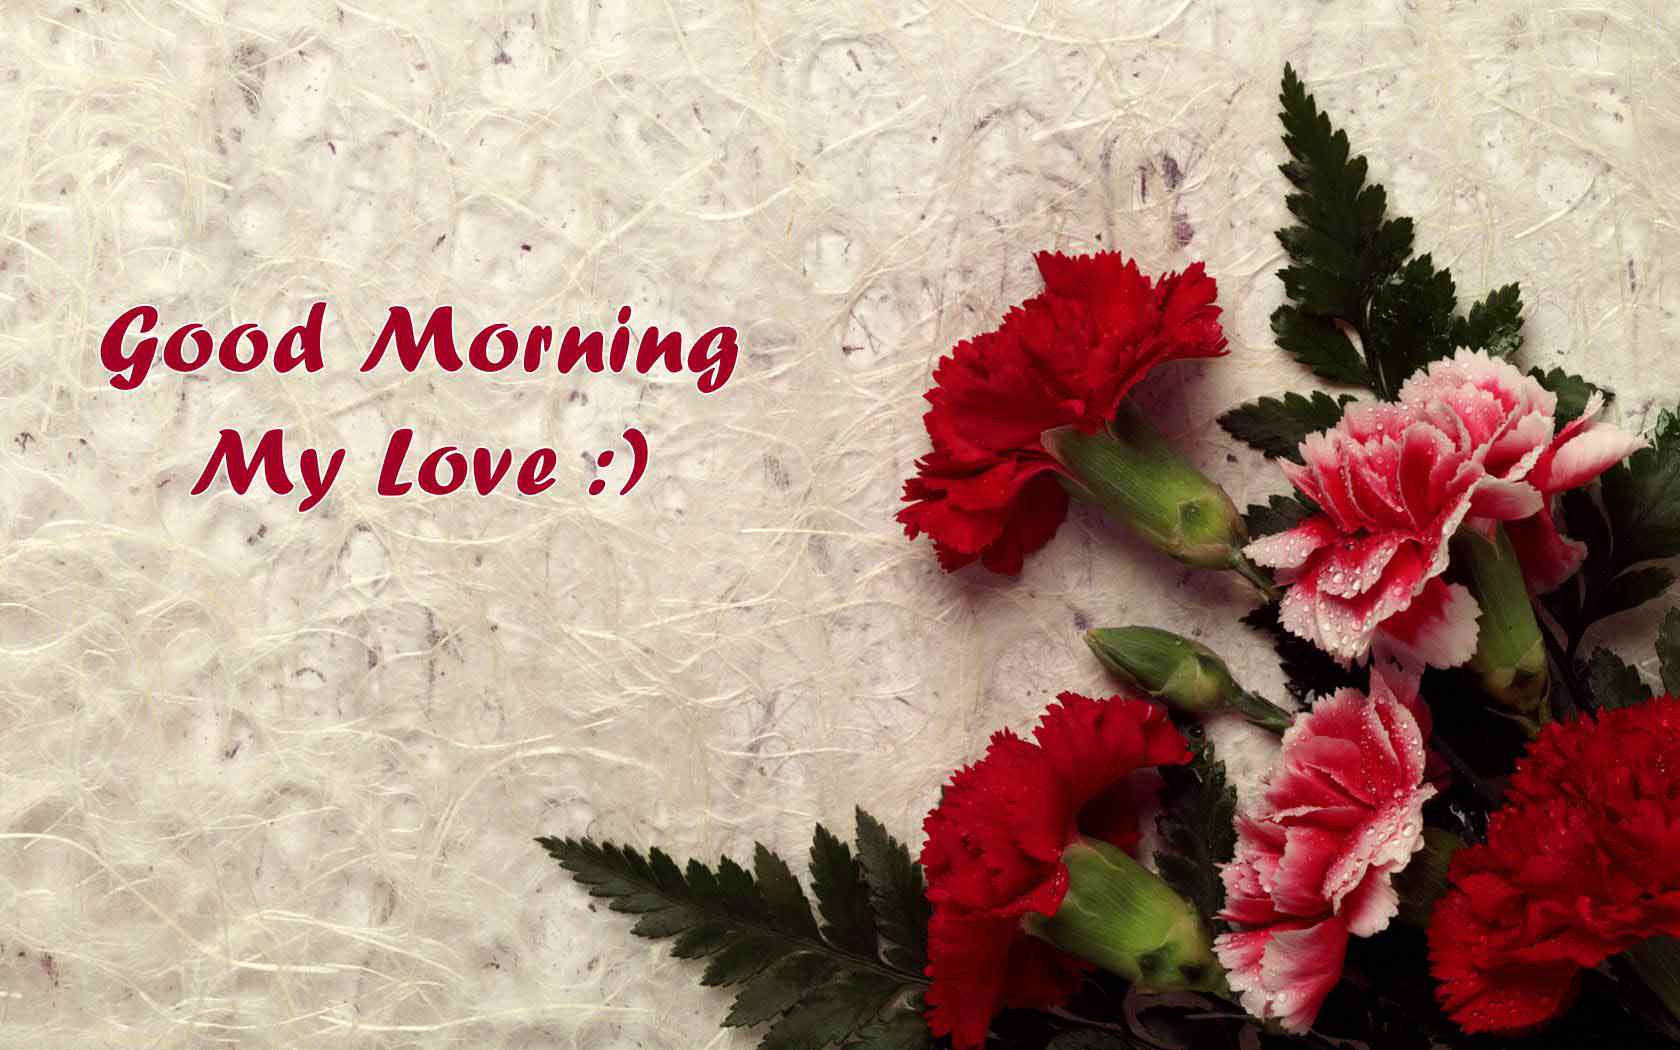 Best Romance Good Morning Wishes With Red Rose